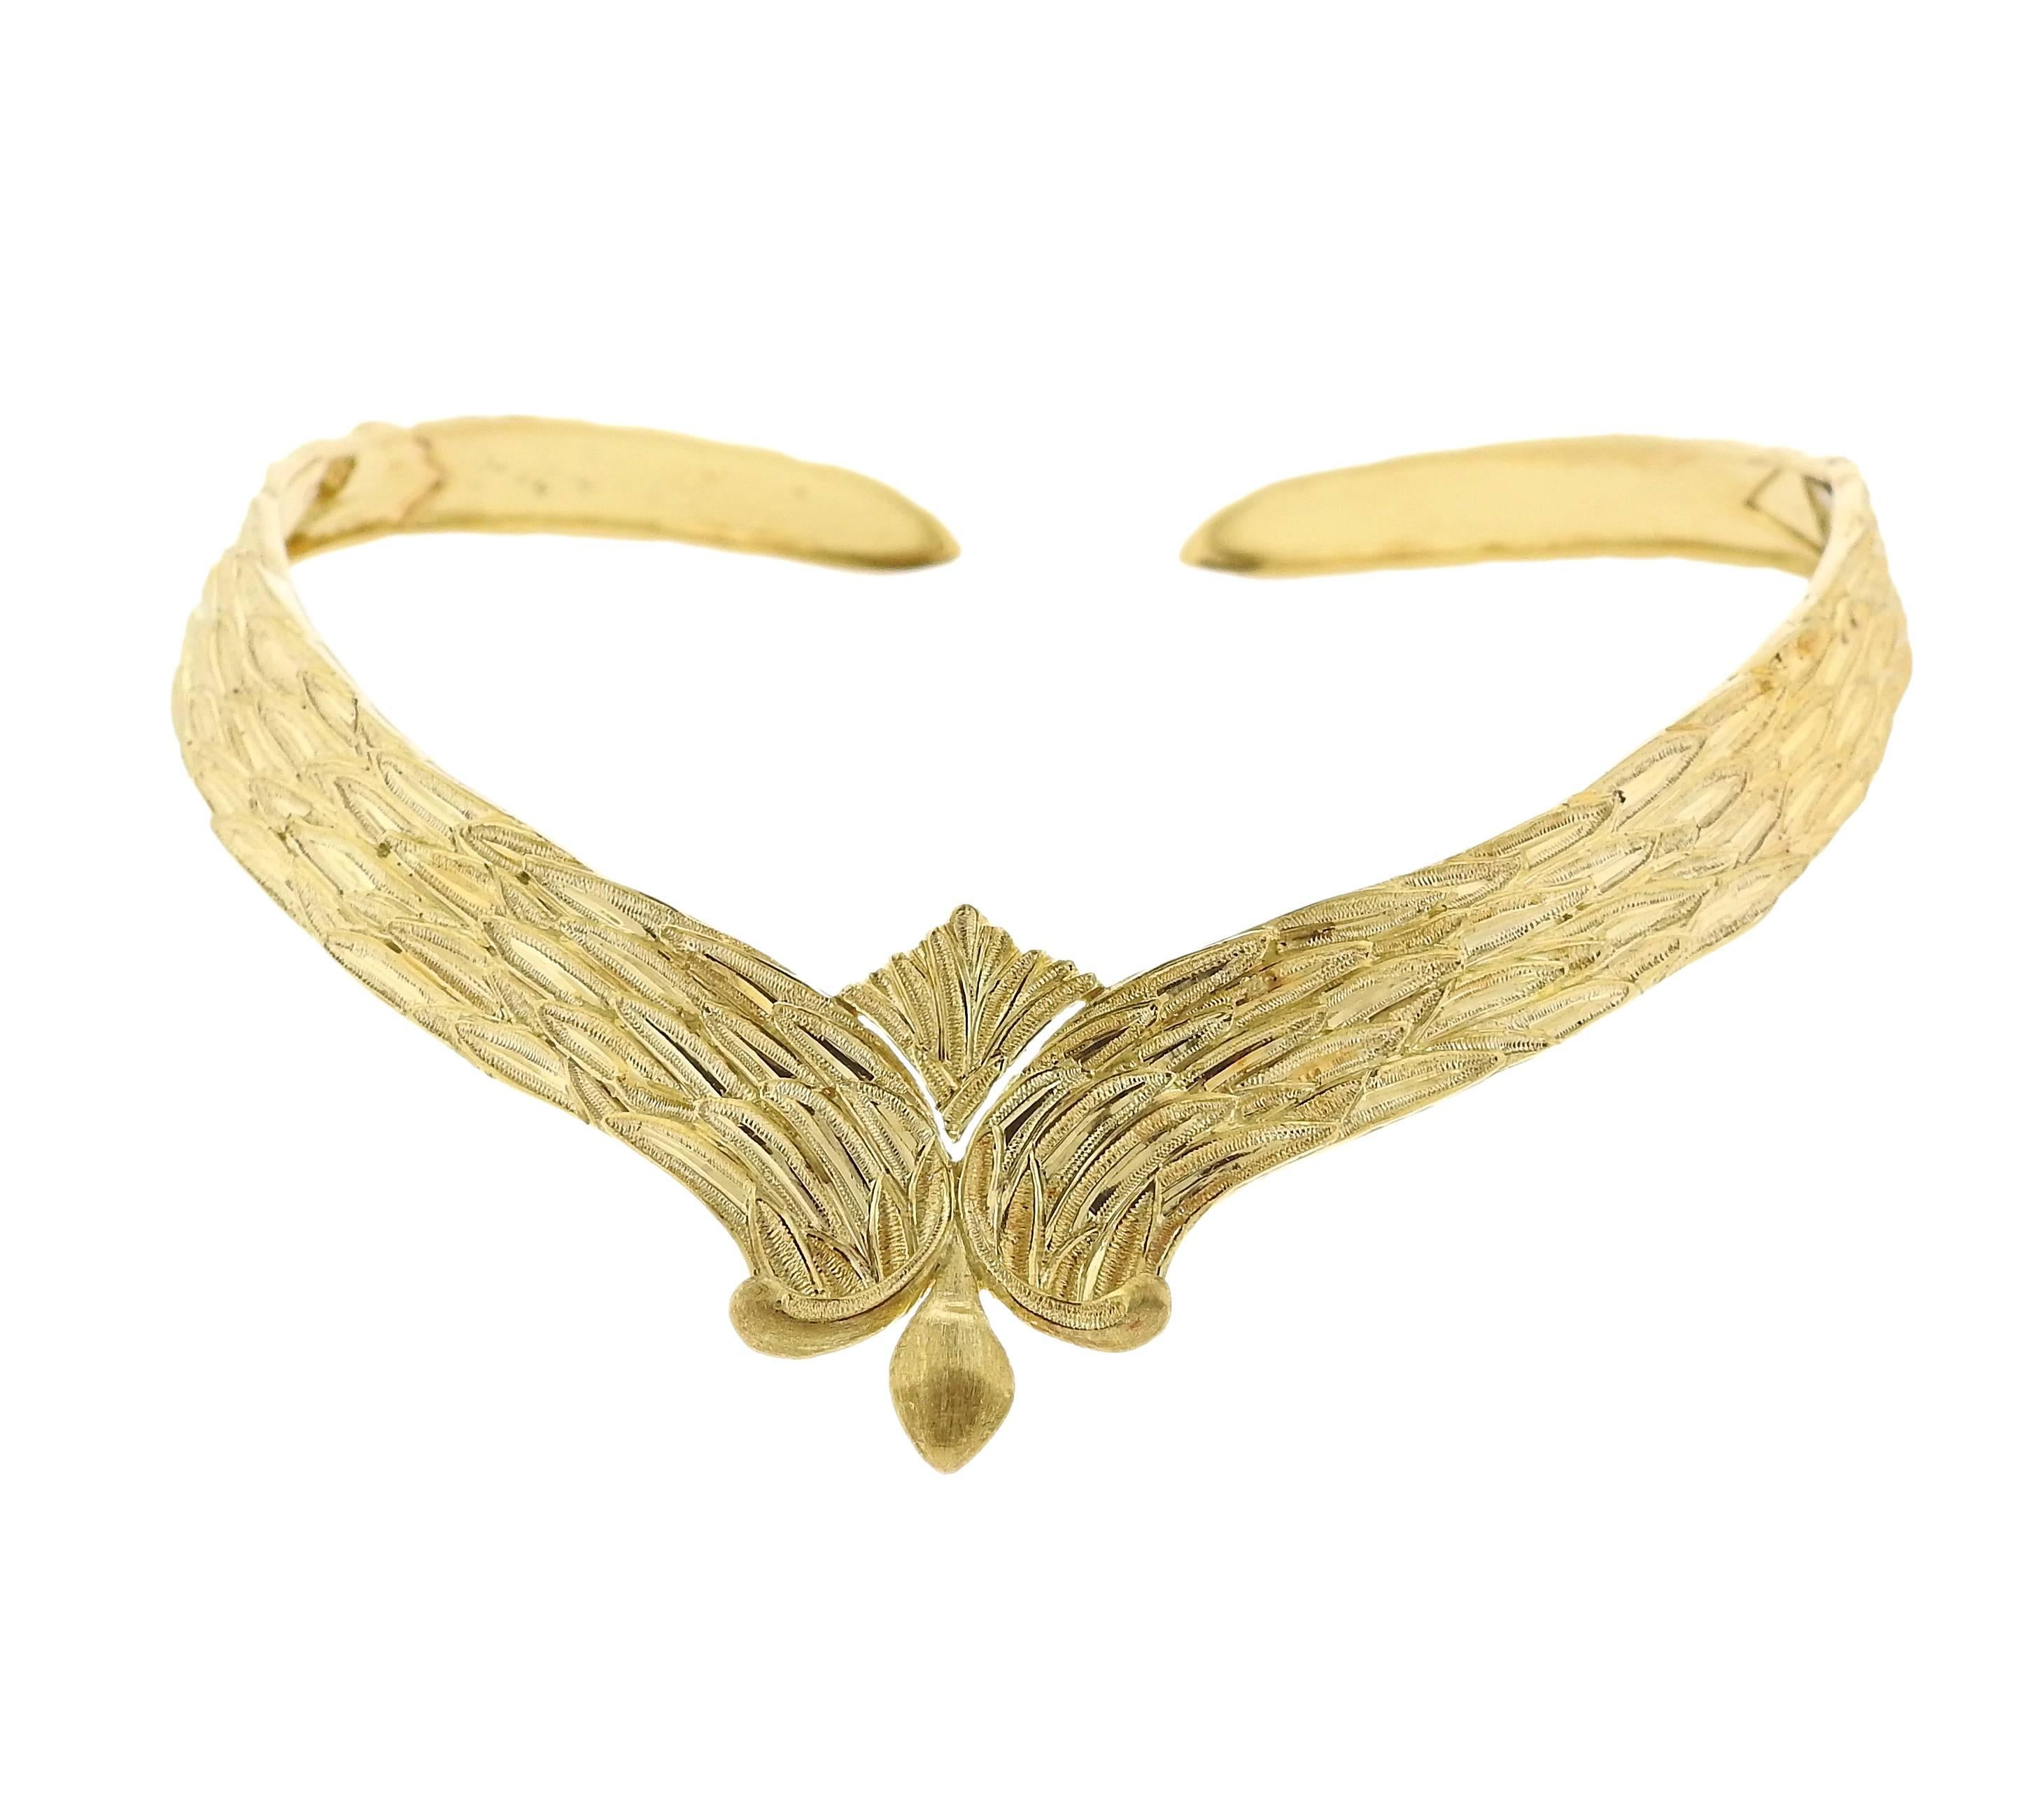 An 18k yellow gold collar necklace, crafted by Buccellati. Necklace will fit a small size neck, inner circumference approx. 13 inches, opening is 1 1/2 inches wide, widest point of the necklace - 30mm wide. Weight of the piece - 45.2 grams. Marked: